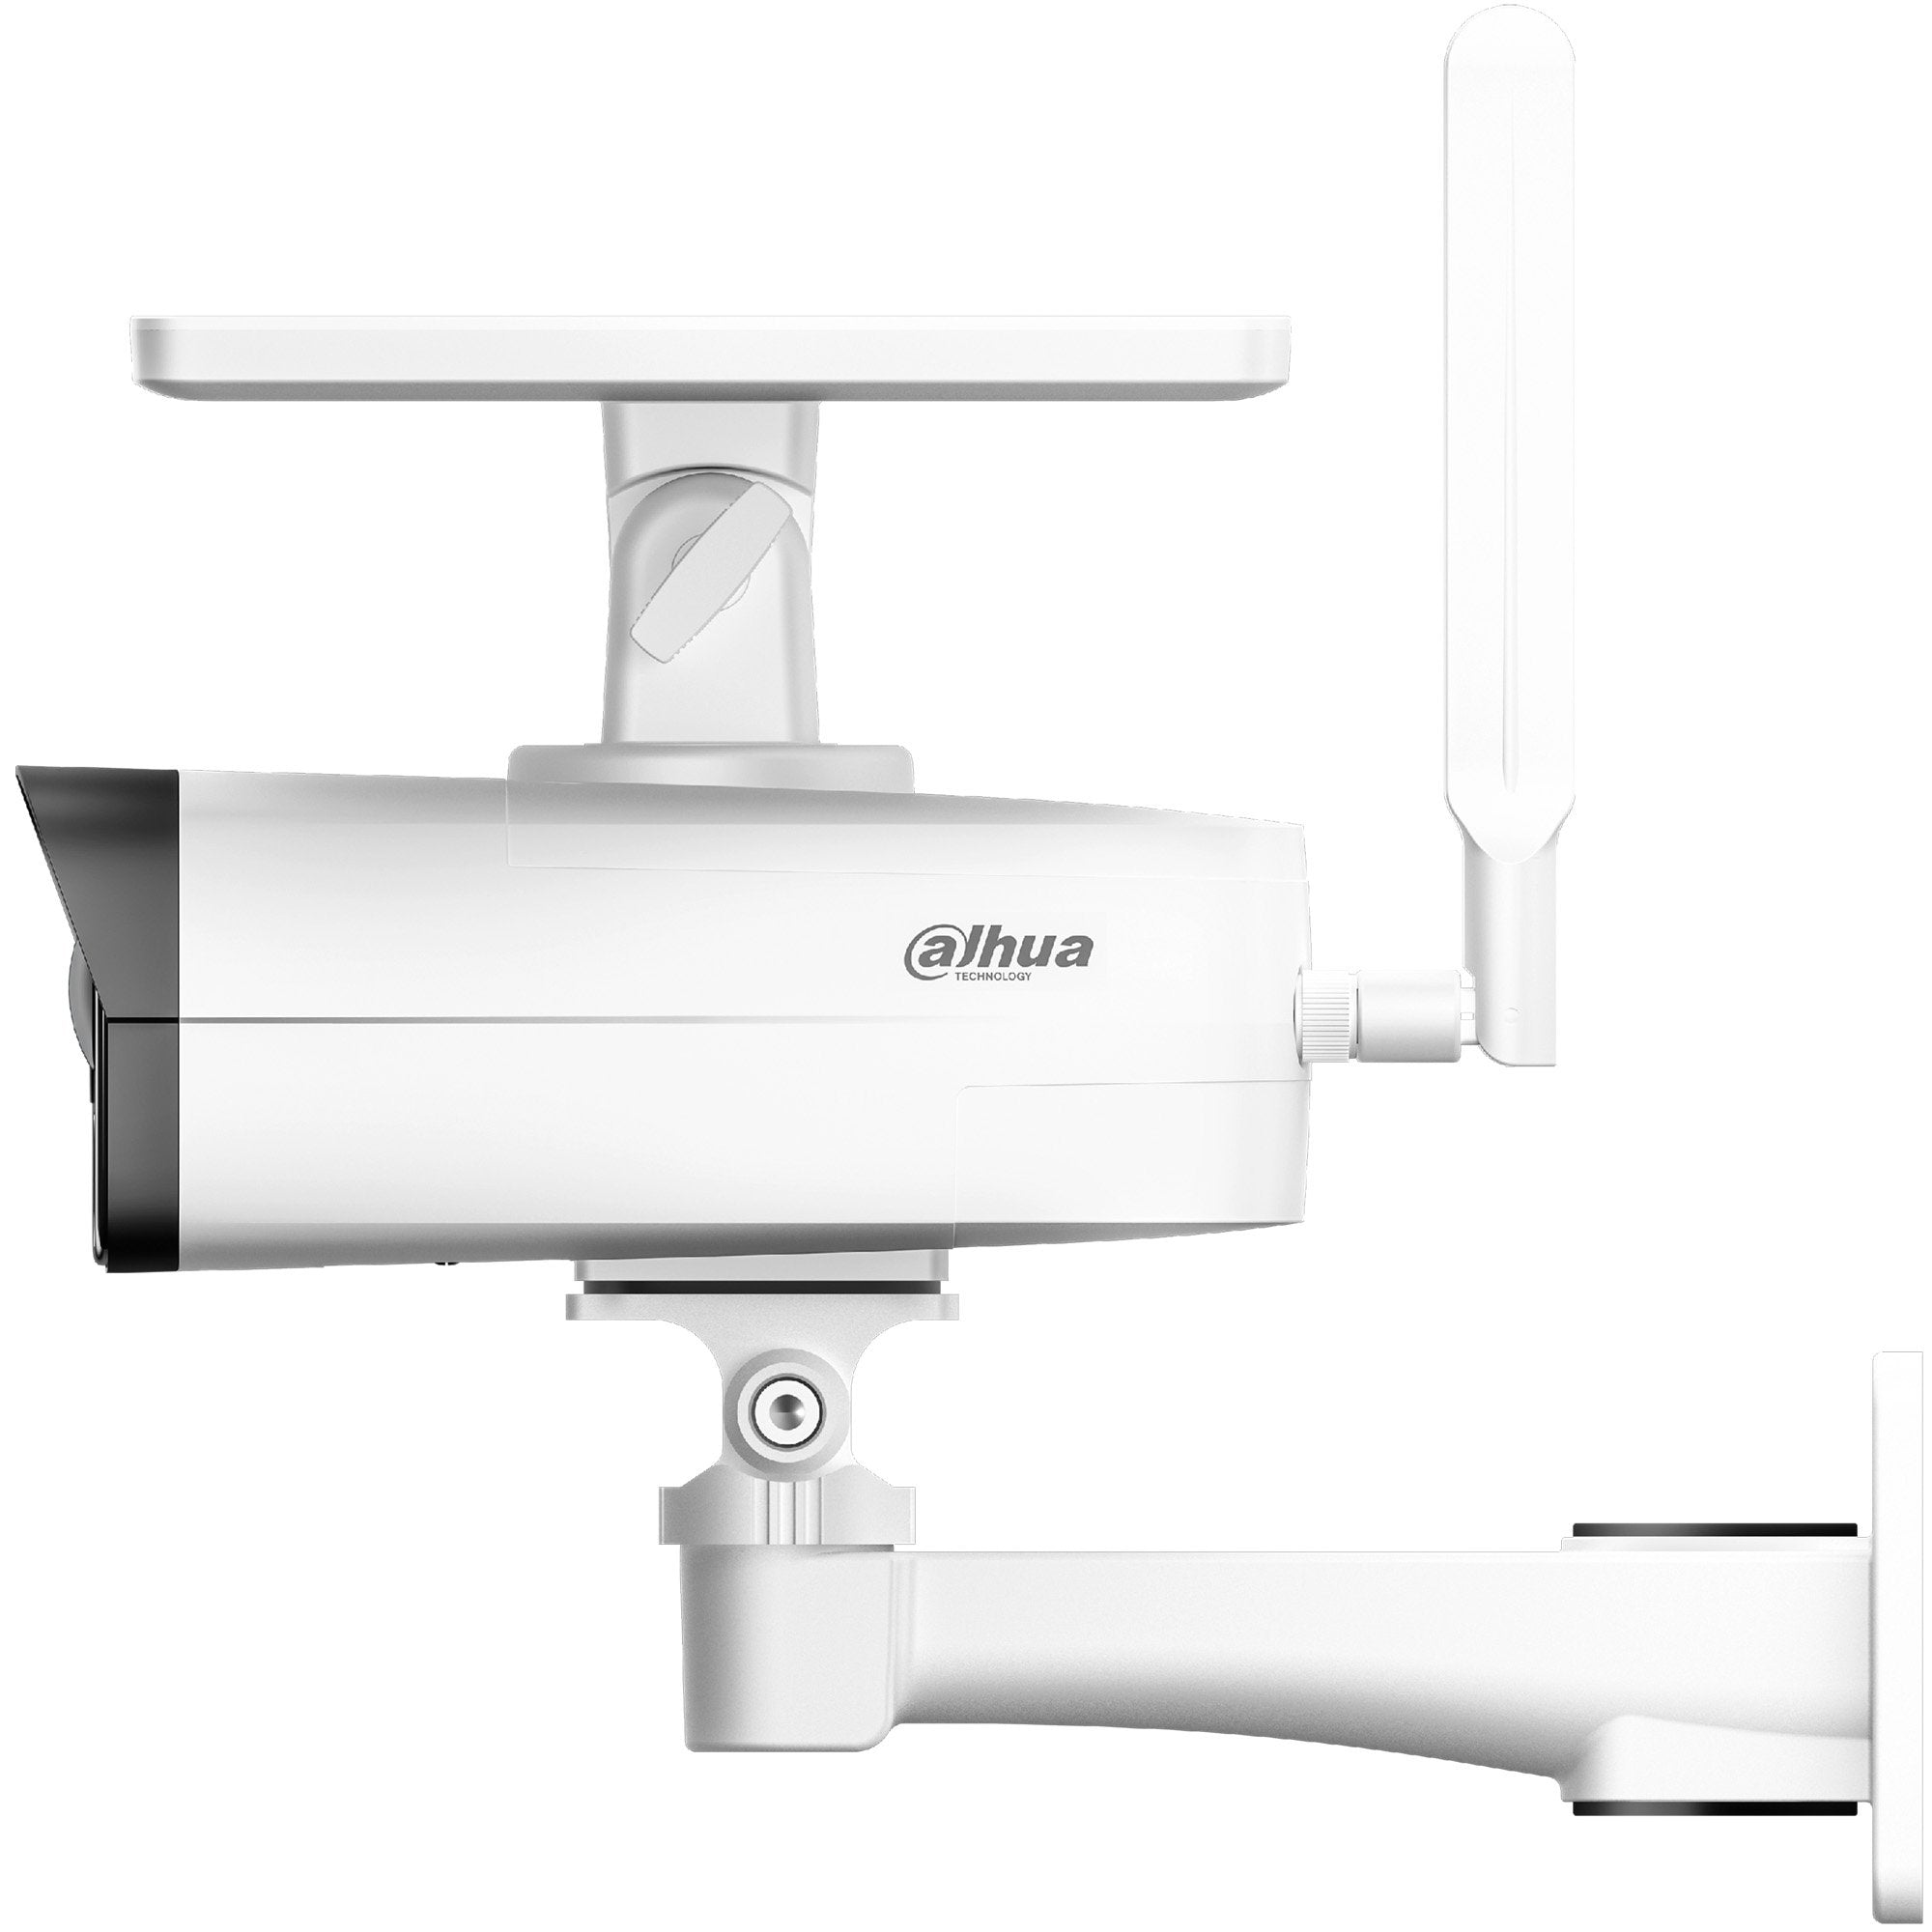 Dahua 4MP IP Lite Series, Solar 4G Bullet Camera, 2.8mm, 120dB WDR, 50m IR / 30m White Light, IP67, MicroSD, Built-In 8GB Memory / PIR / Mic / Speaker, Lasts Up To 10 Days With 1Hr View / Day (Junction Box: PFA121)